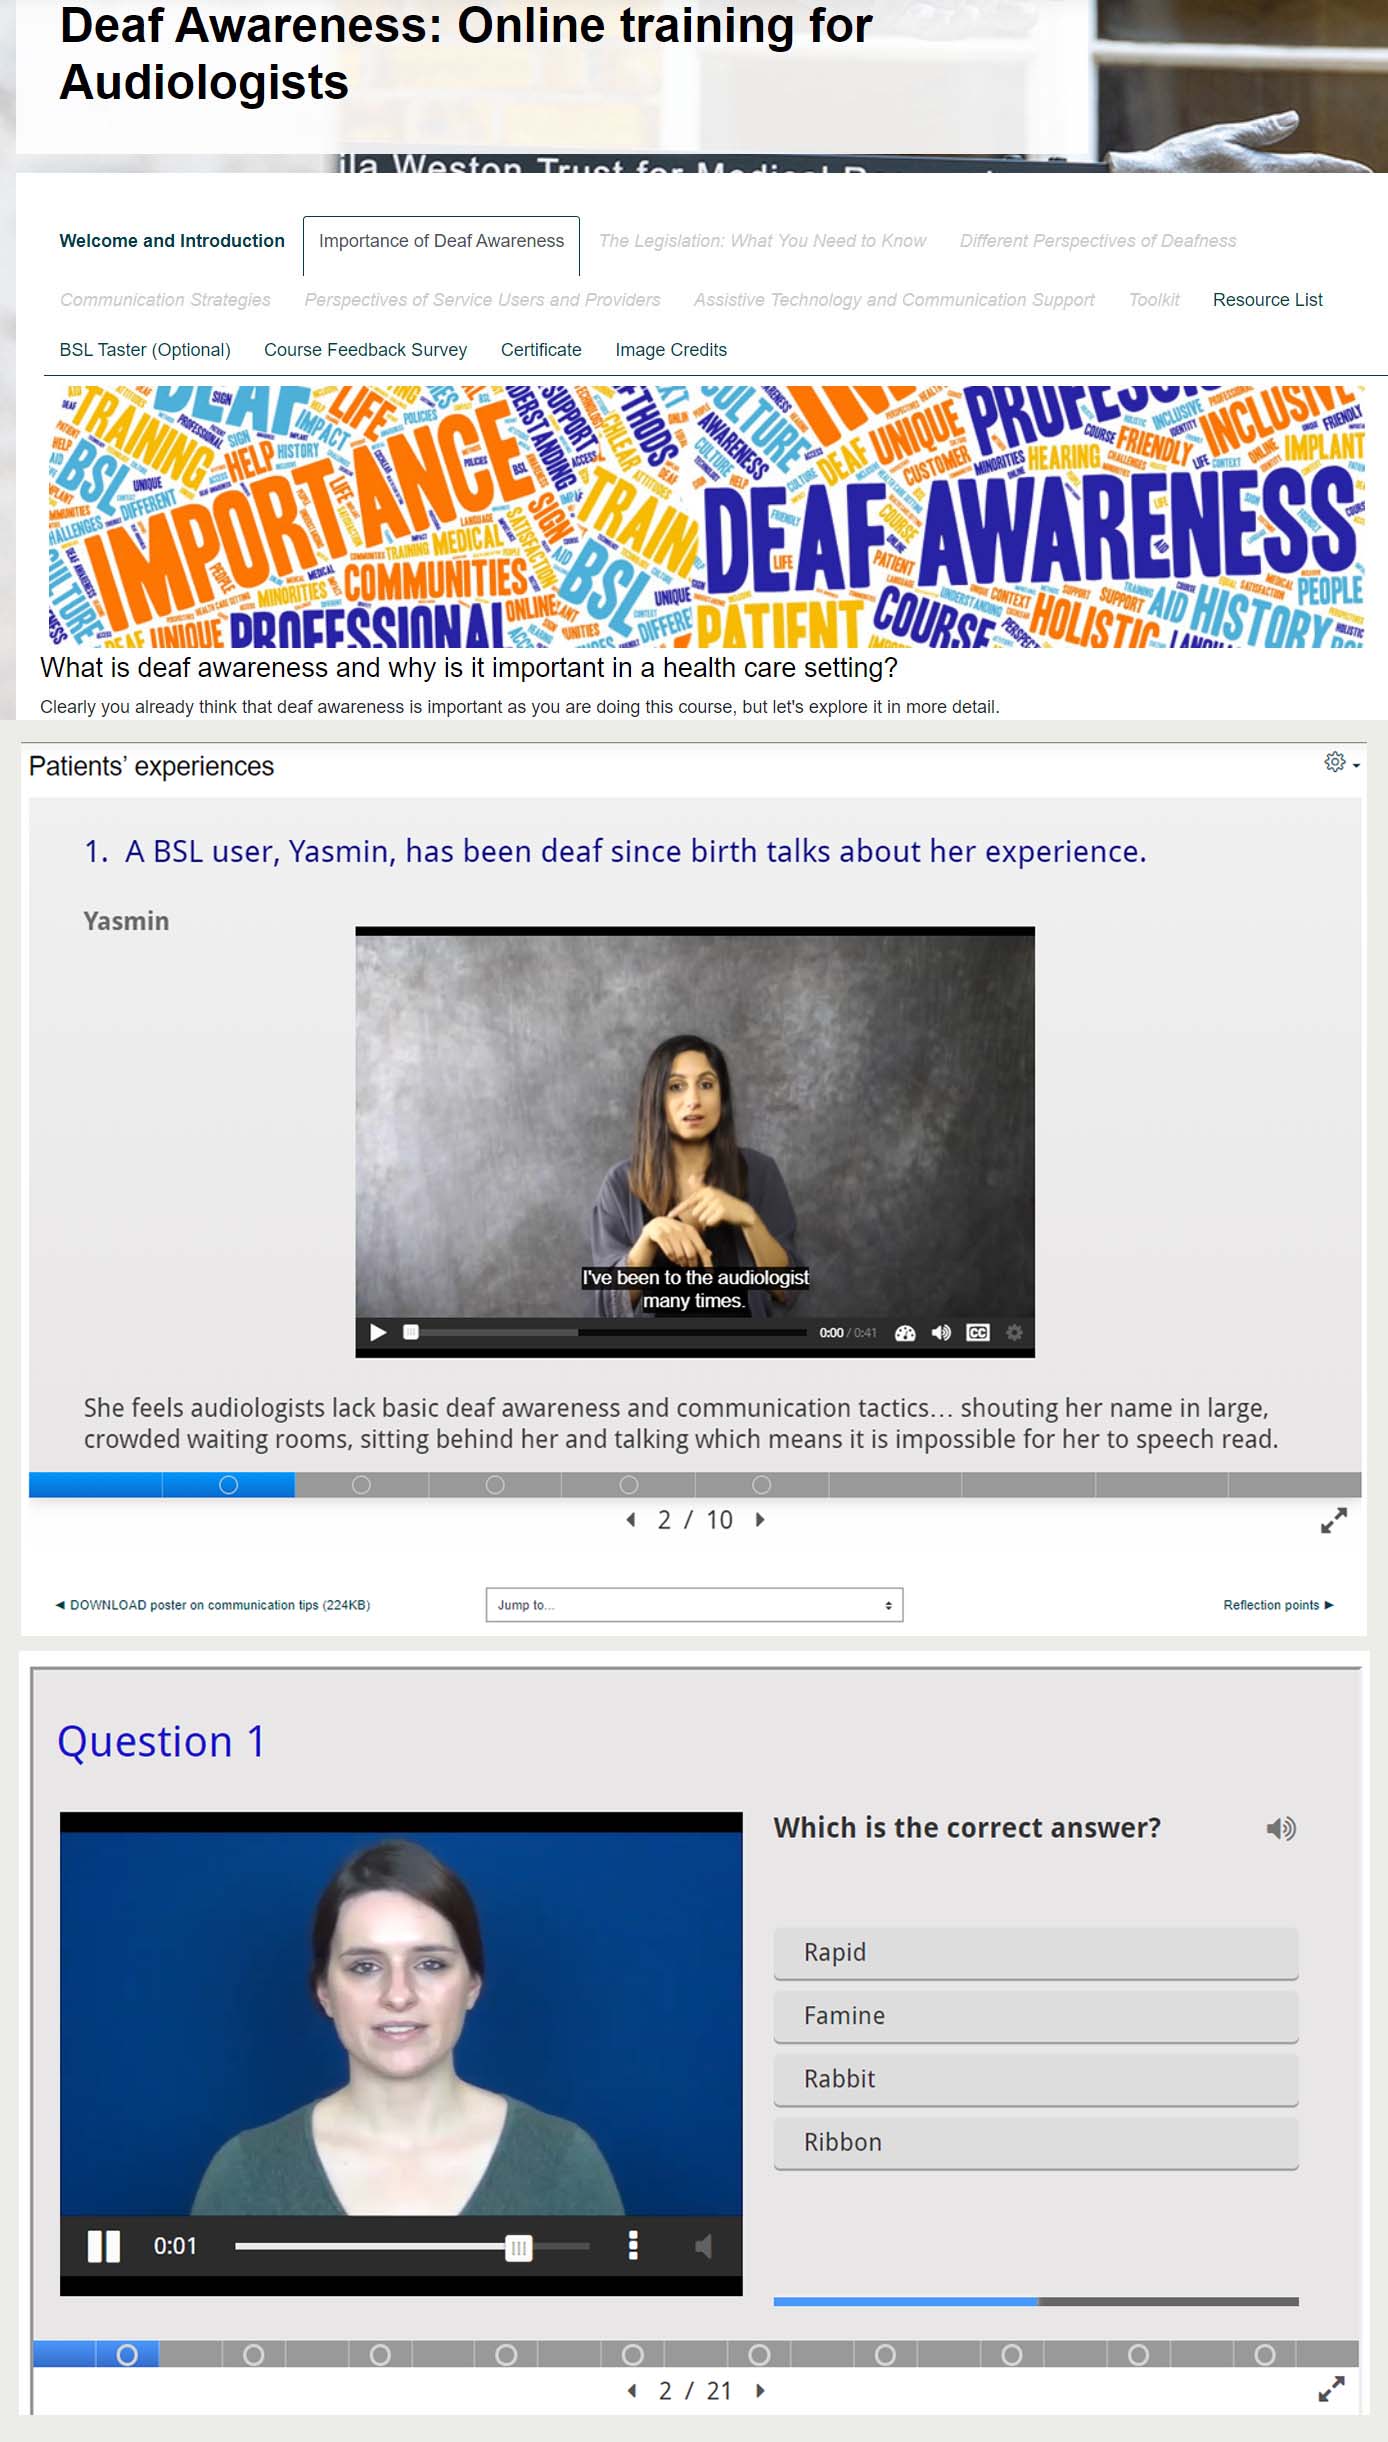 An image showing the front page of the course, a video page, and the page with a lip-reading game.